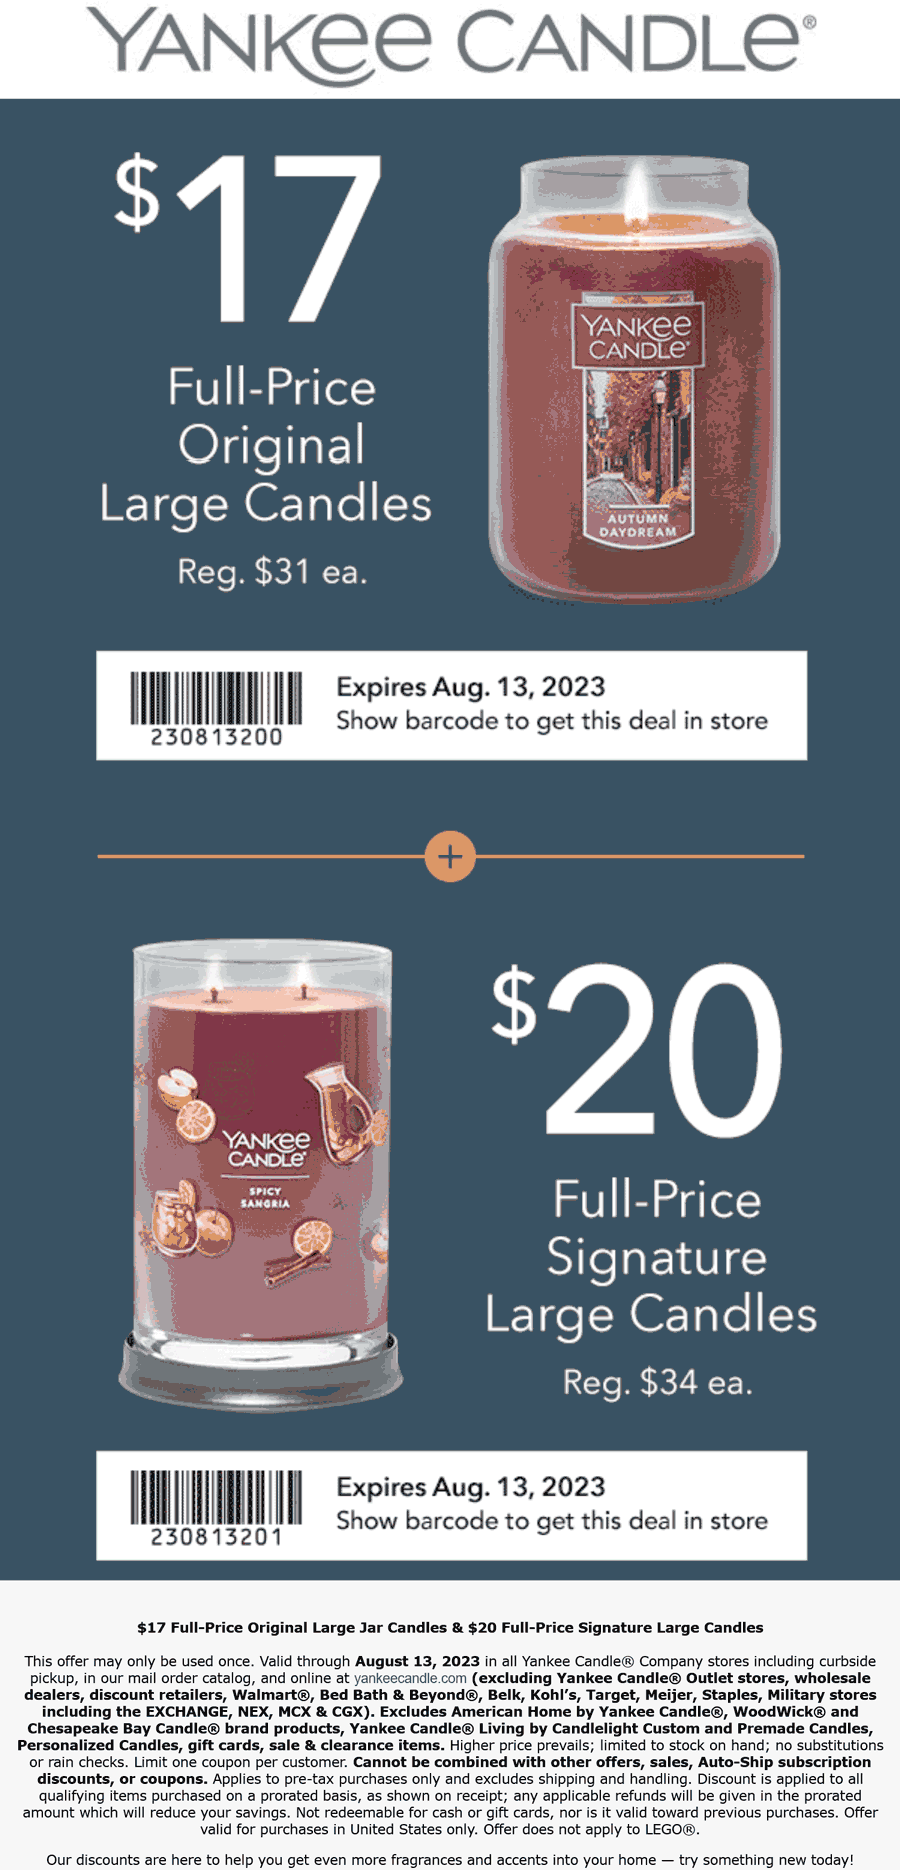 Yankee Candle stores Coupon  $20 large candles at Yankee Candle, ditto online #yankeecandle 